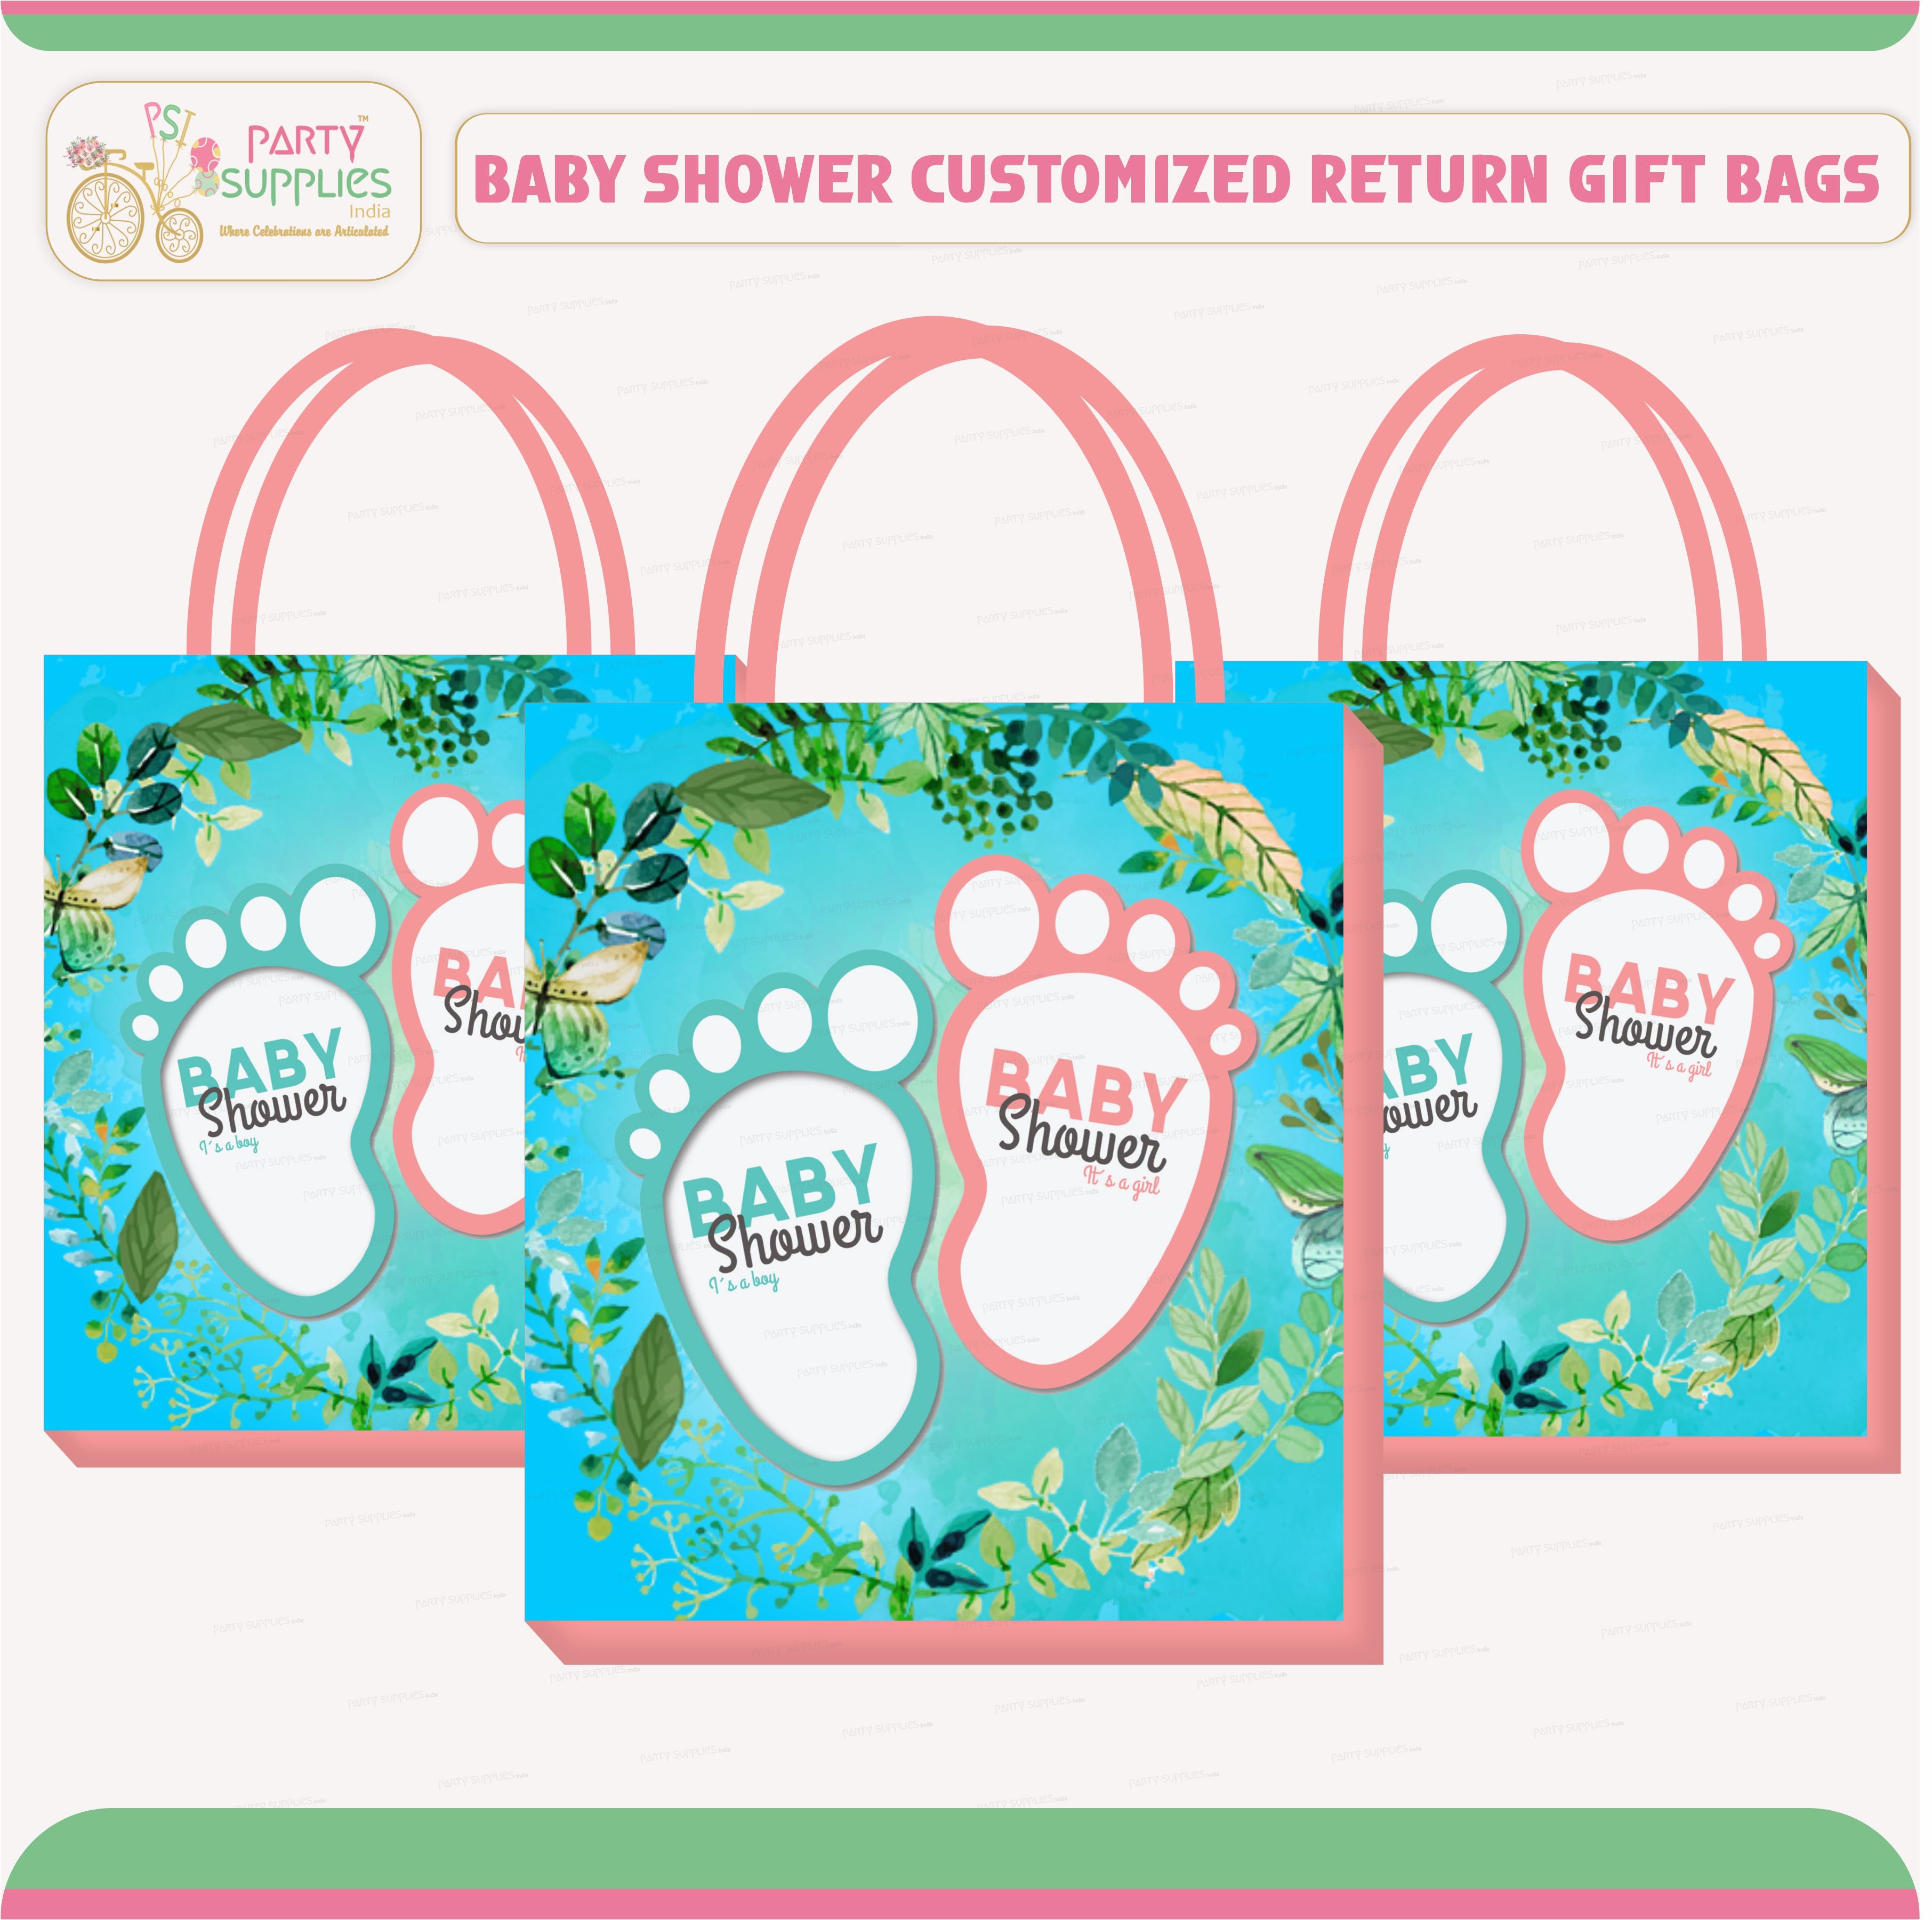 Top Best Baby Shower Gifts | Unique baby shower gift ideas